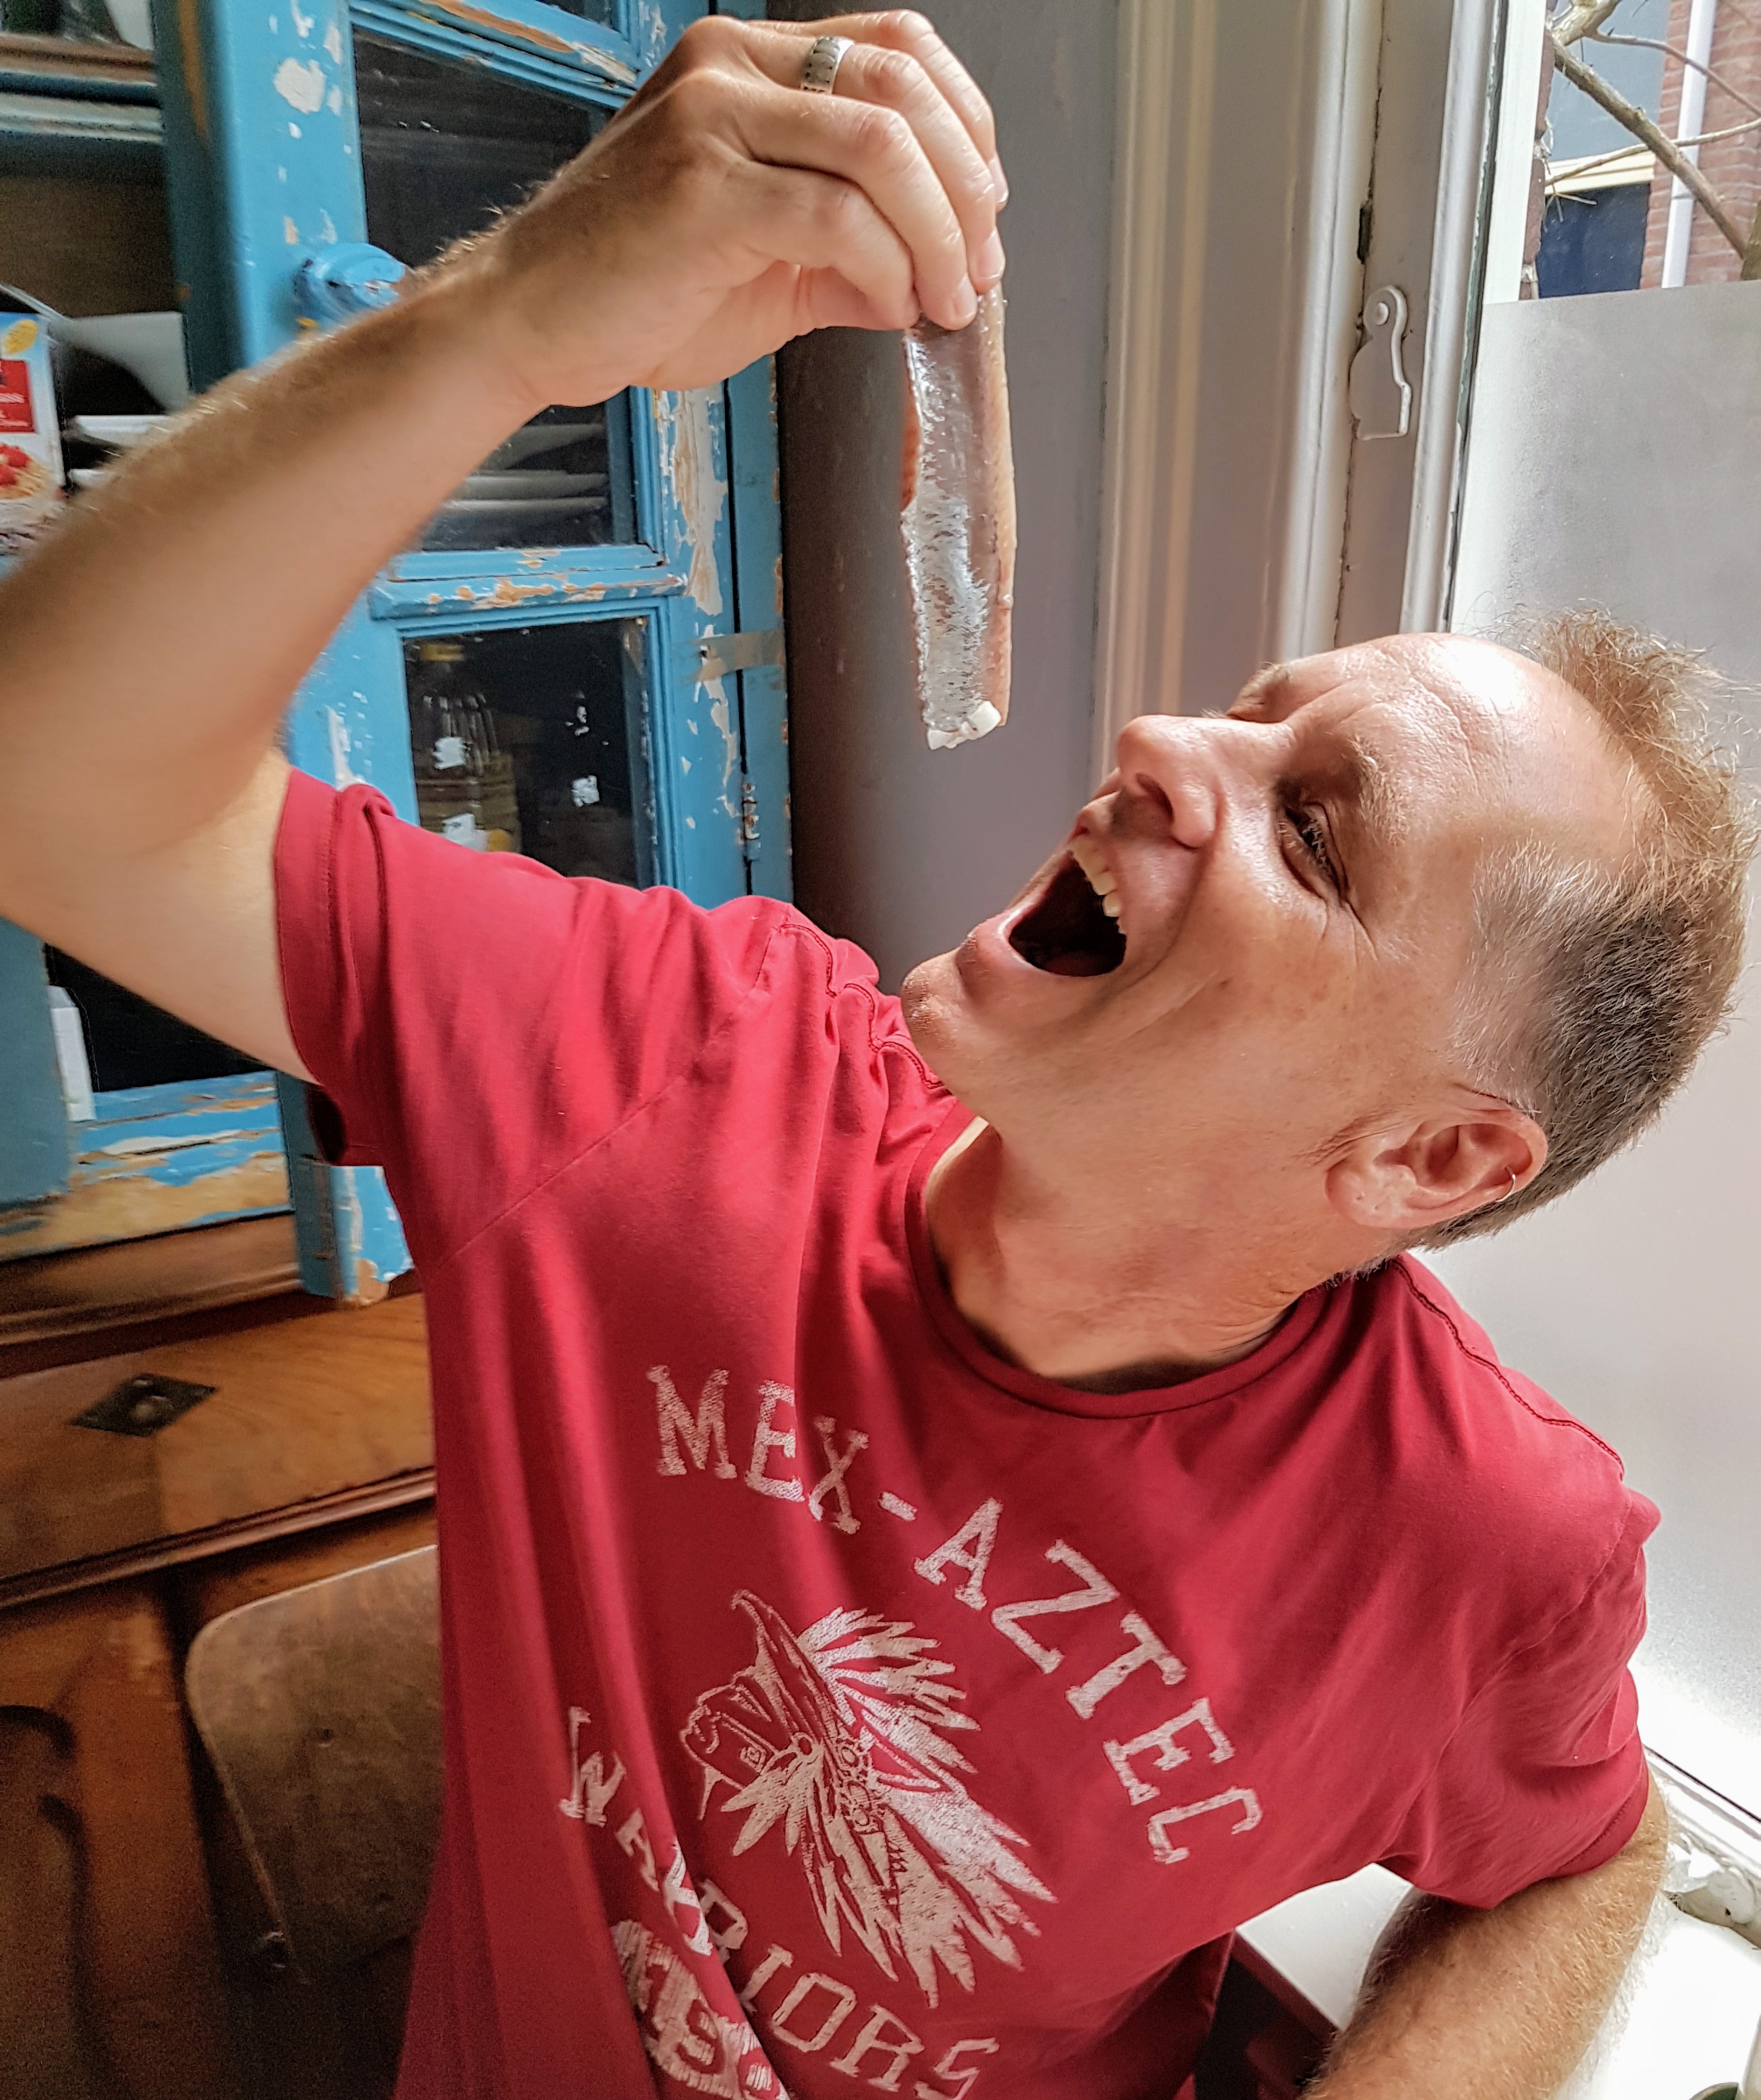 Eating raw herring the traditional way